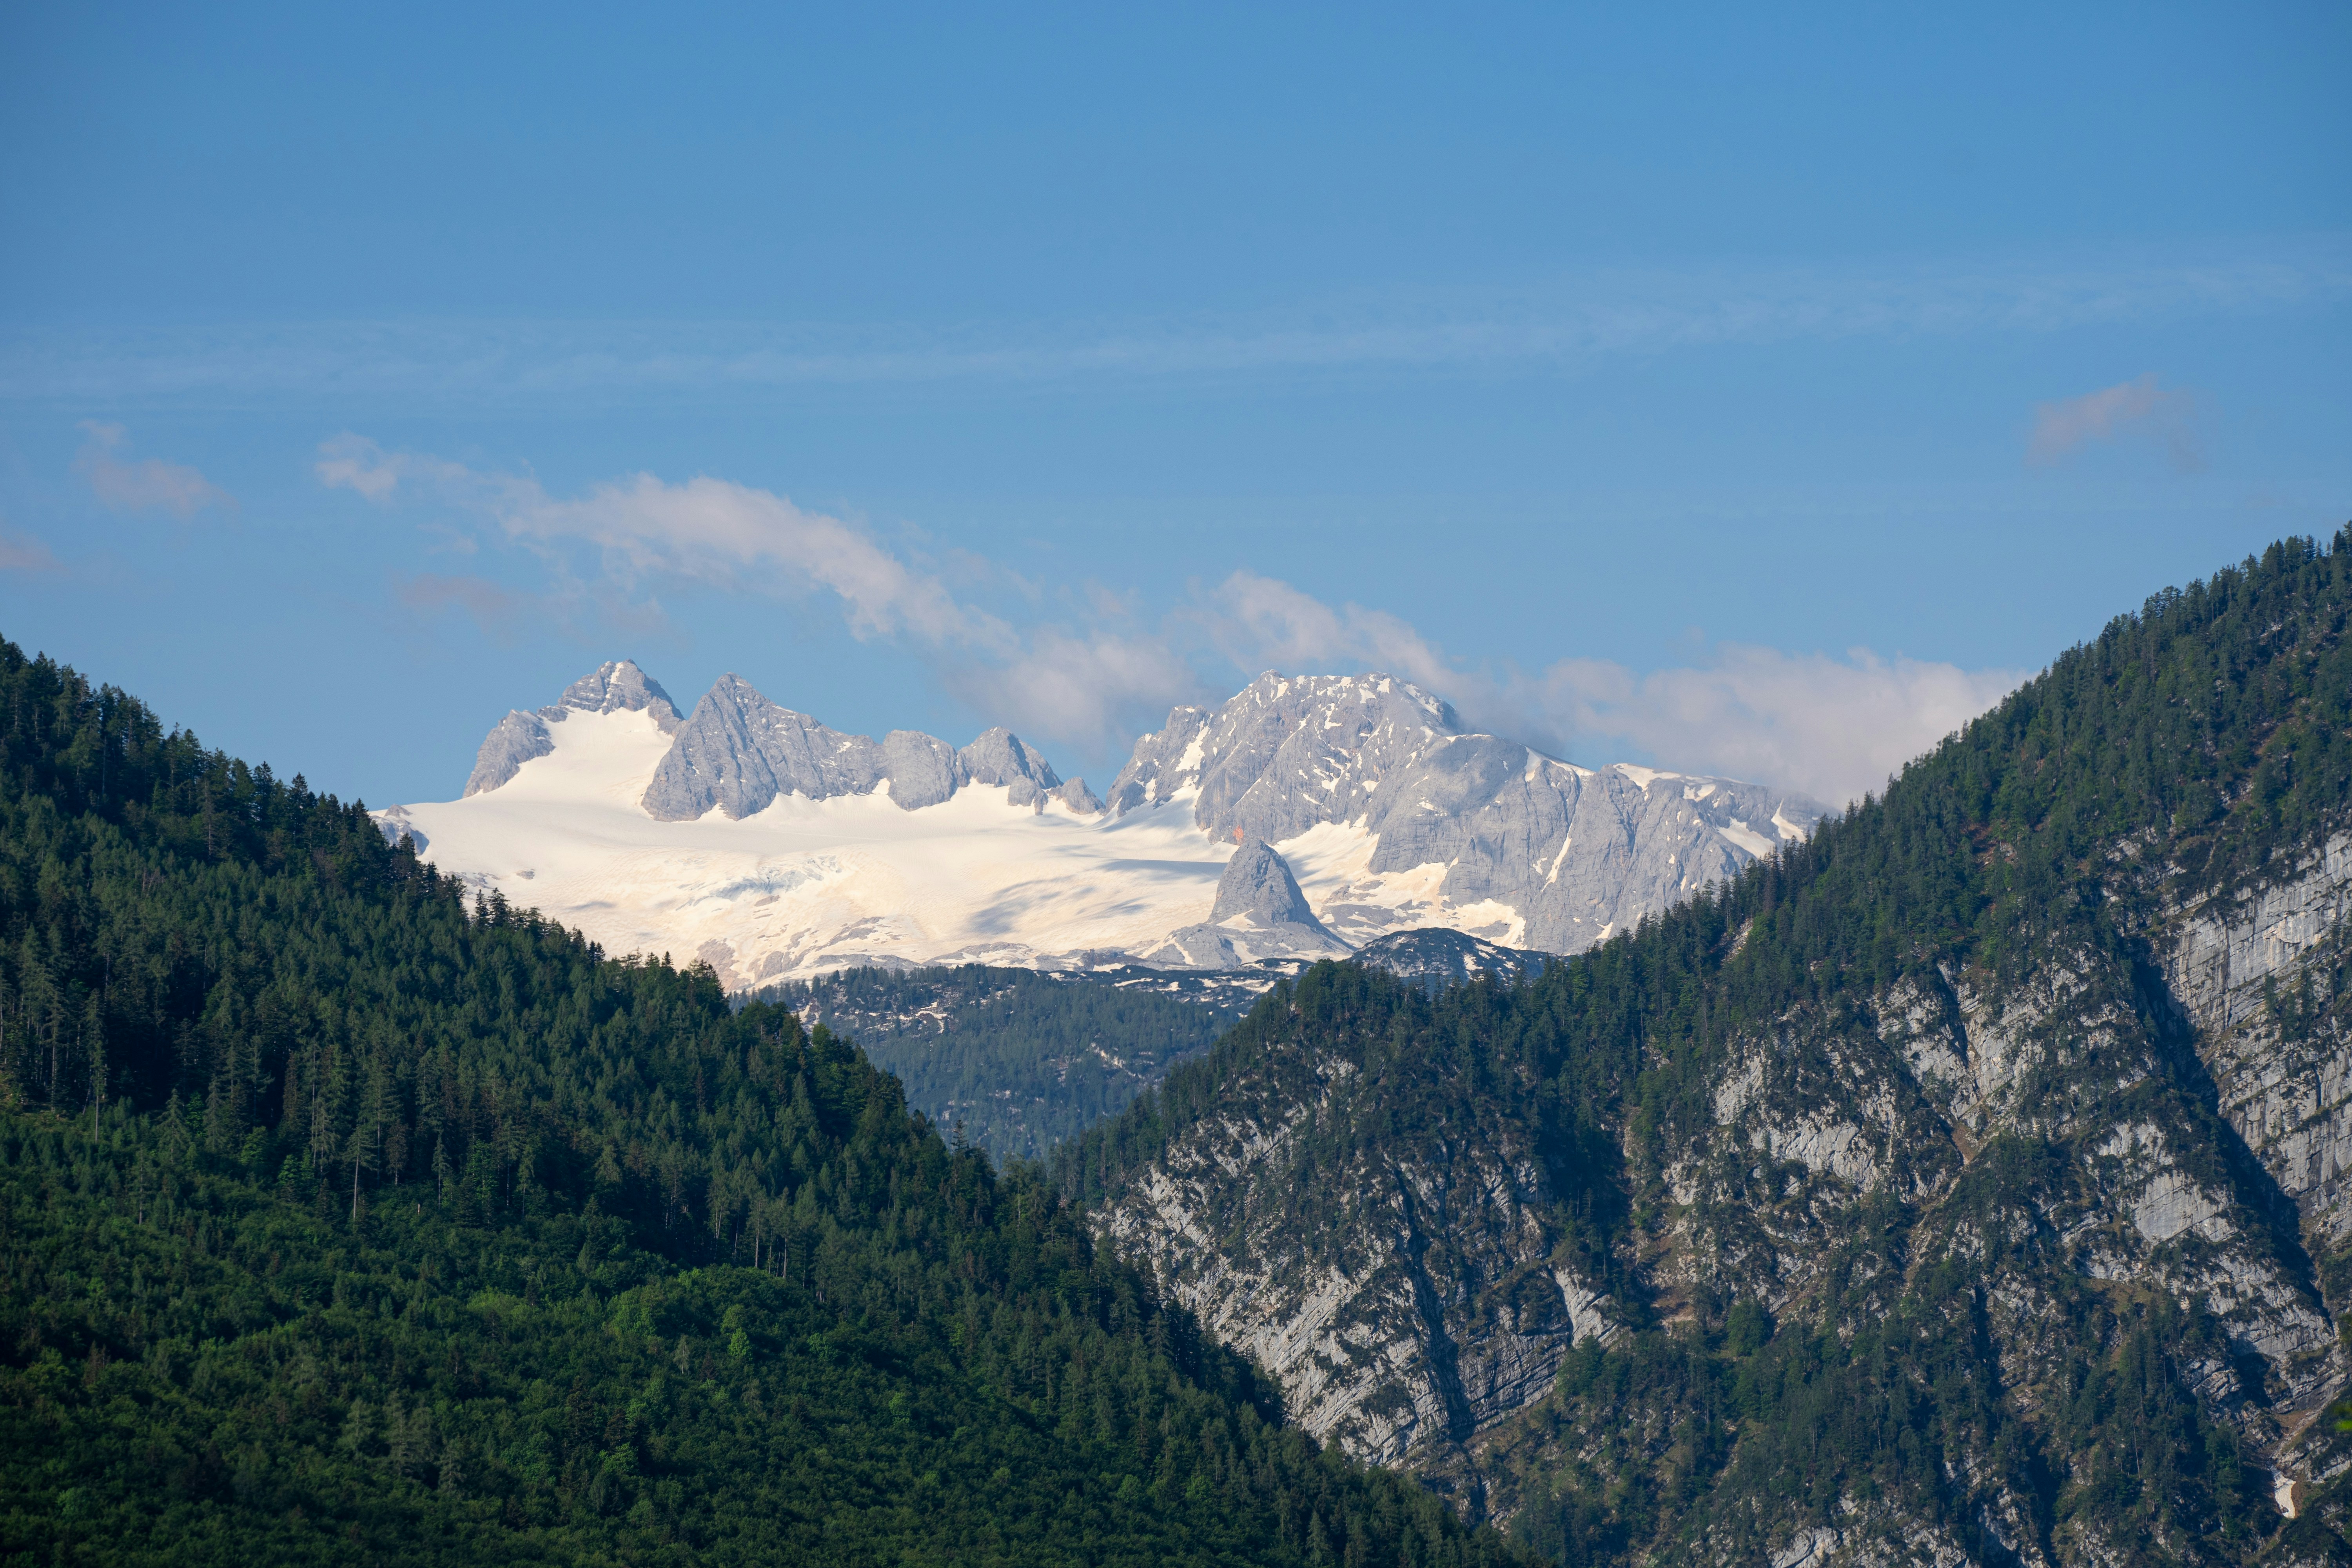 View at Dachstein from Bad Aussee.